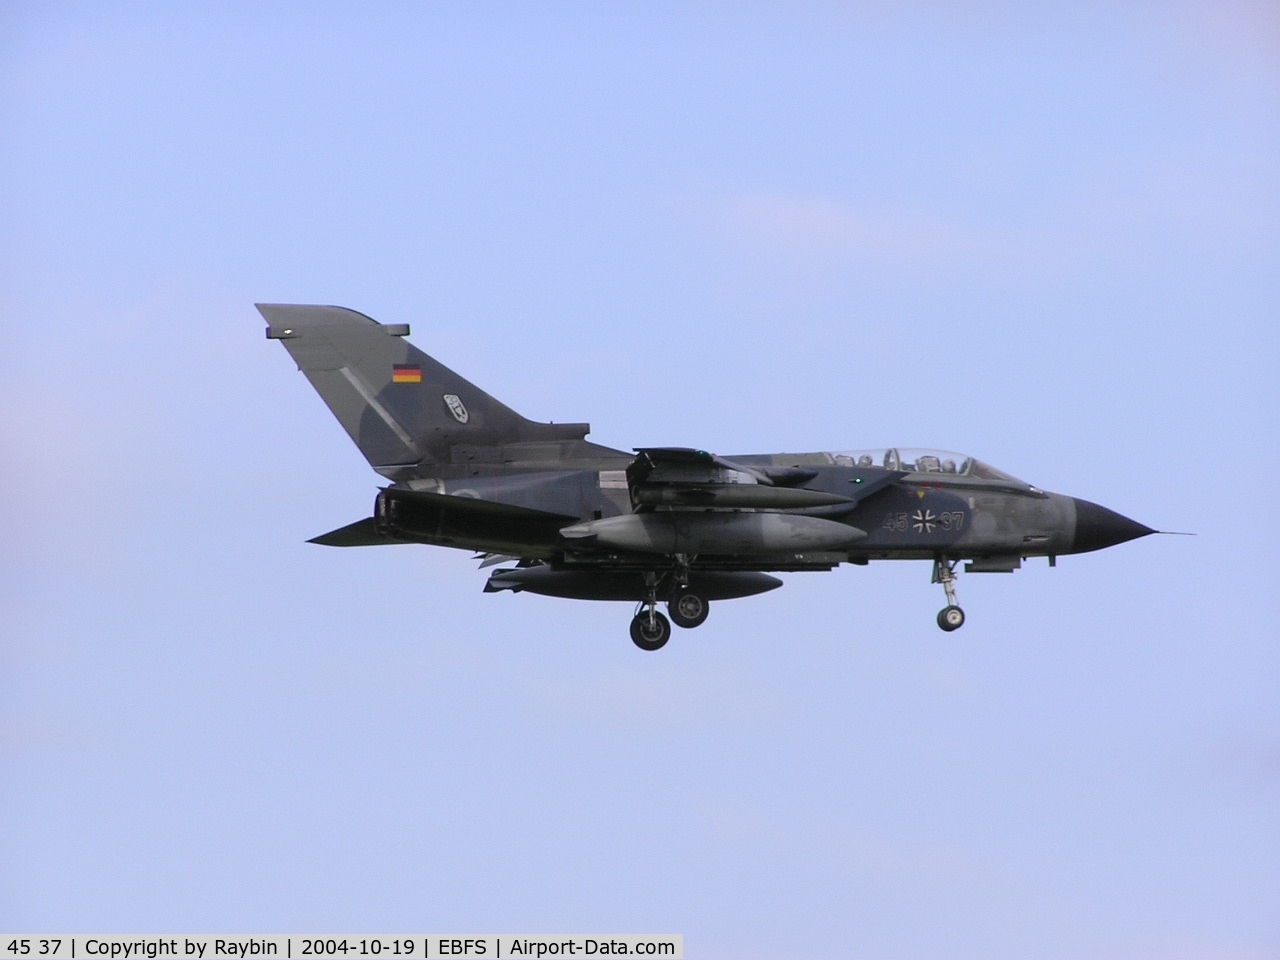 45 37, Panavia Tornado IDS C/N 594/GS185/4237, Old german navy c/s on this Luftwaffe Tornado
Navy gave up fighter planes in 2003